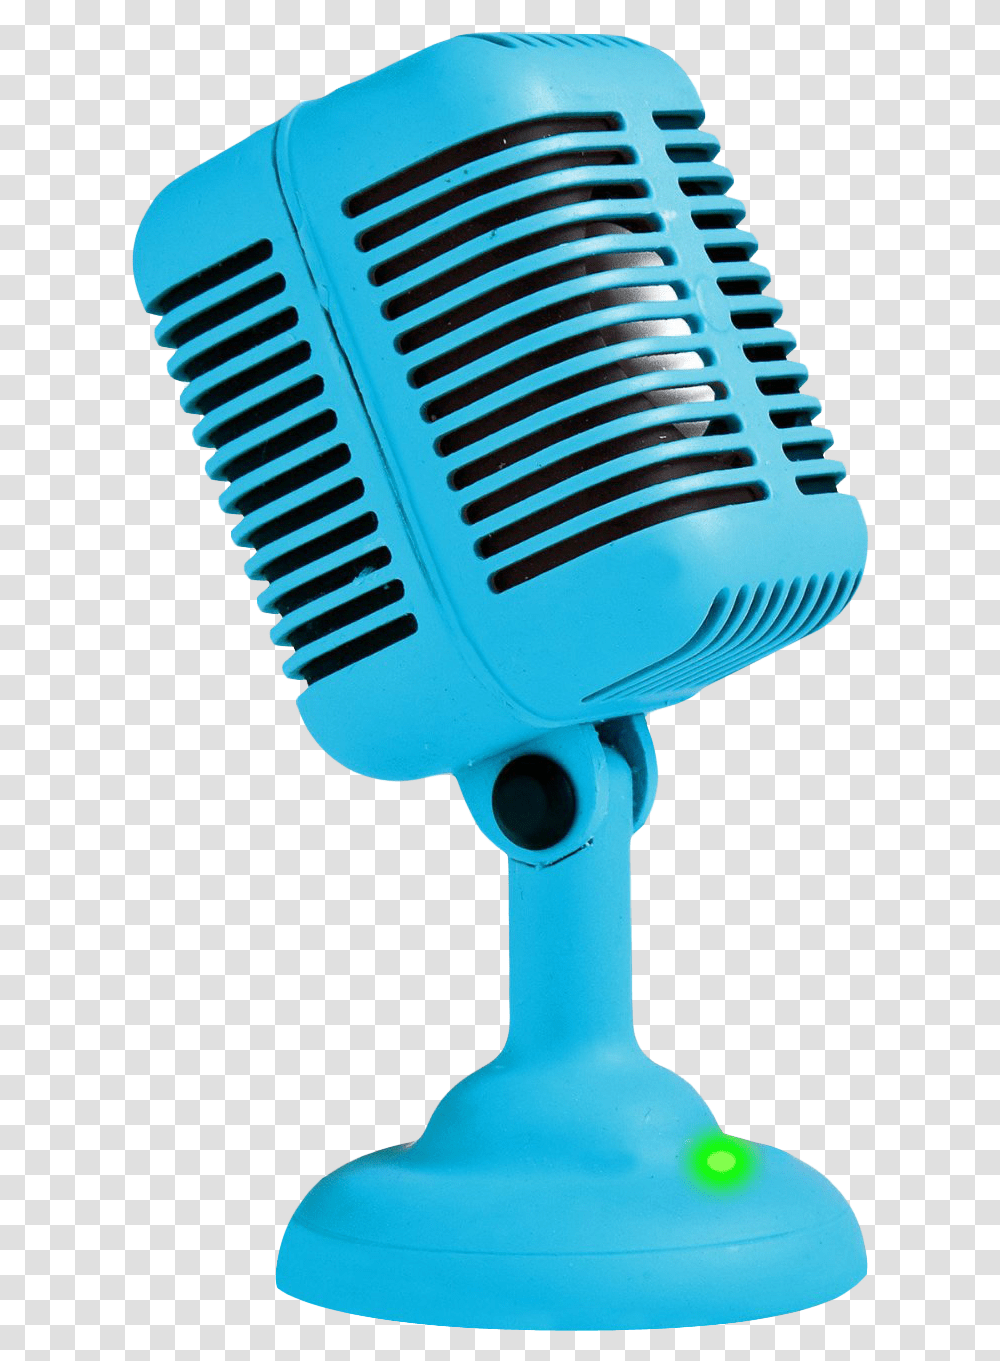 Podcast Microphone Image Mic Biru, Electrical Device, Fire Hydrant Transparent Png